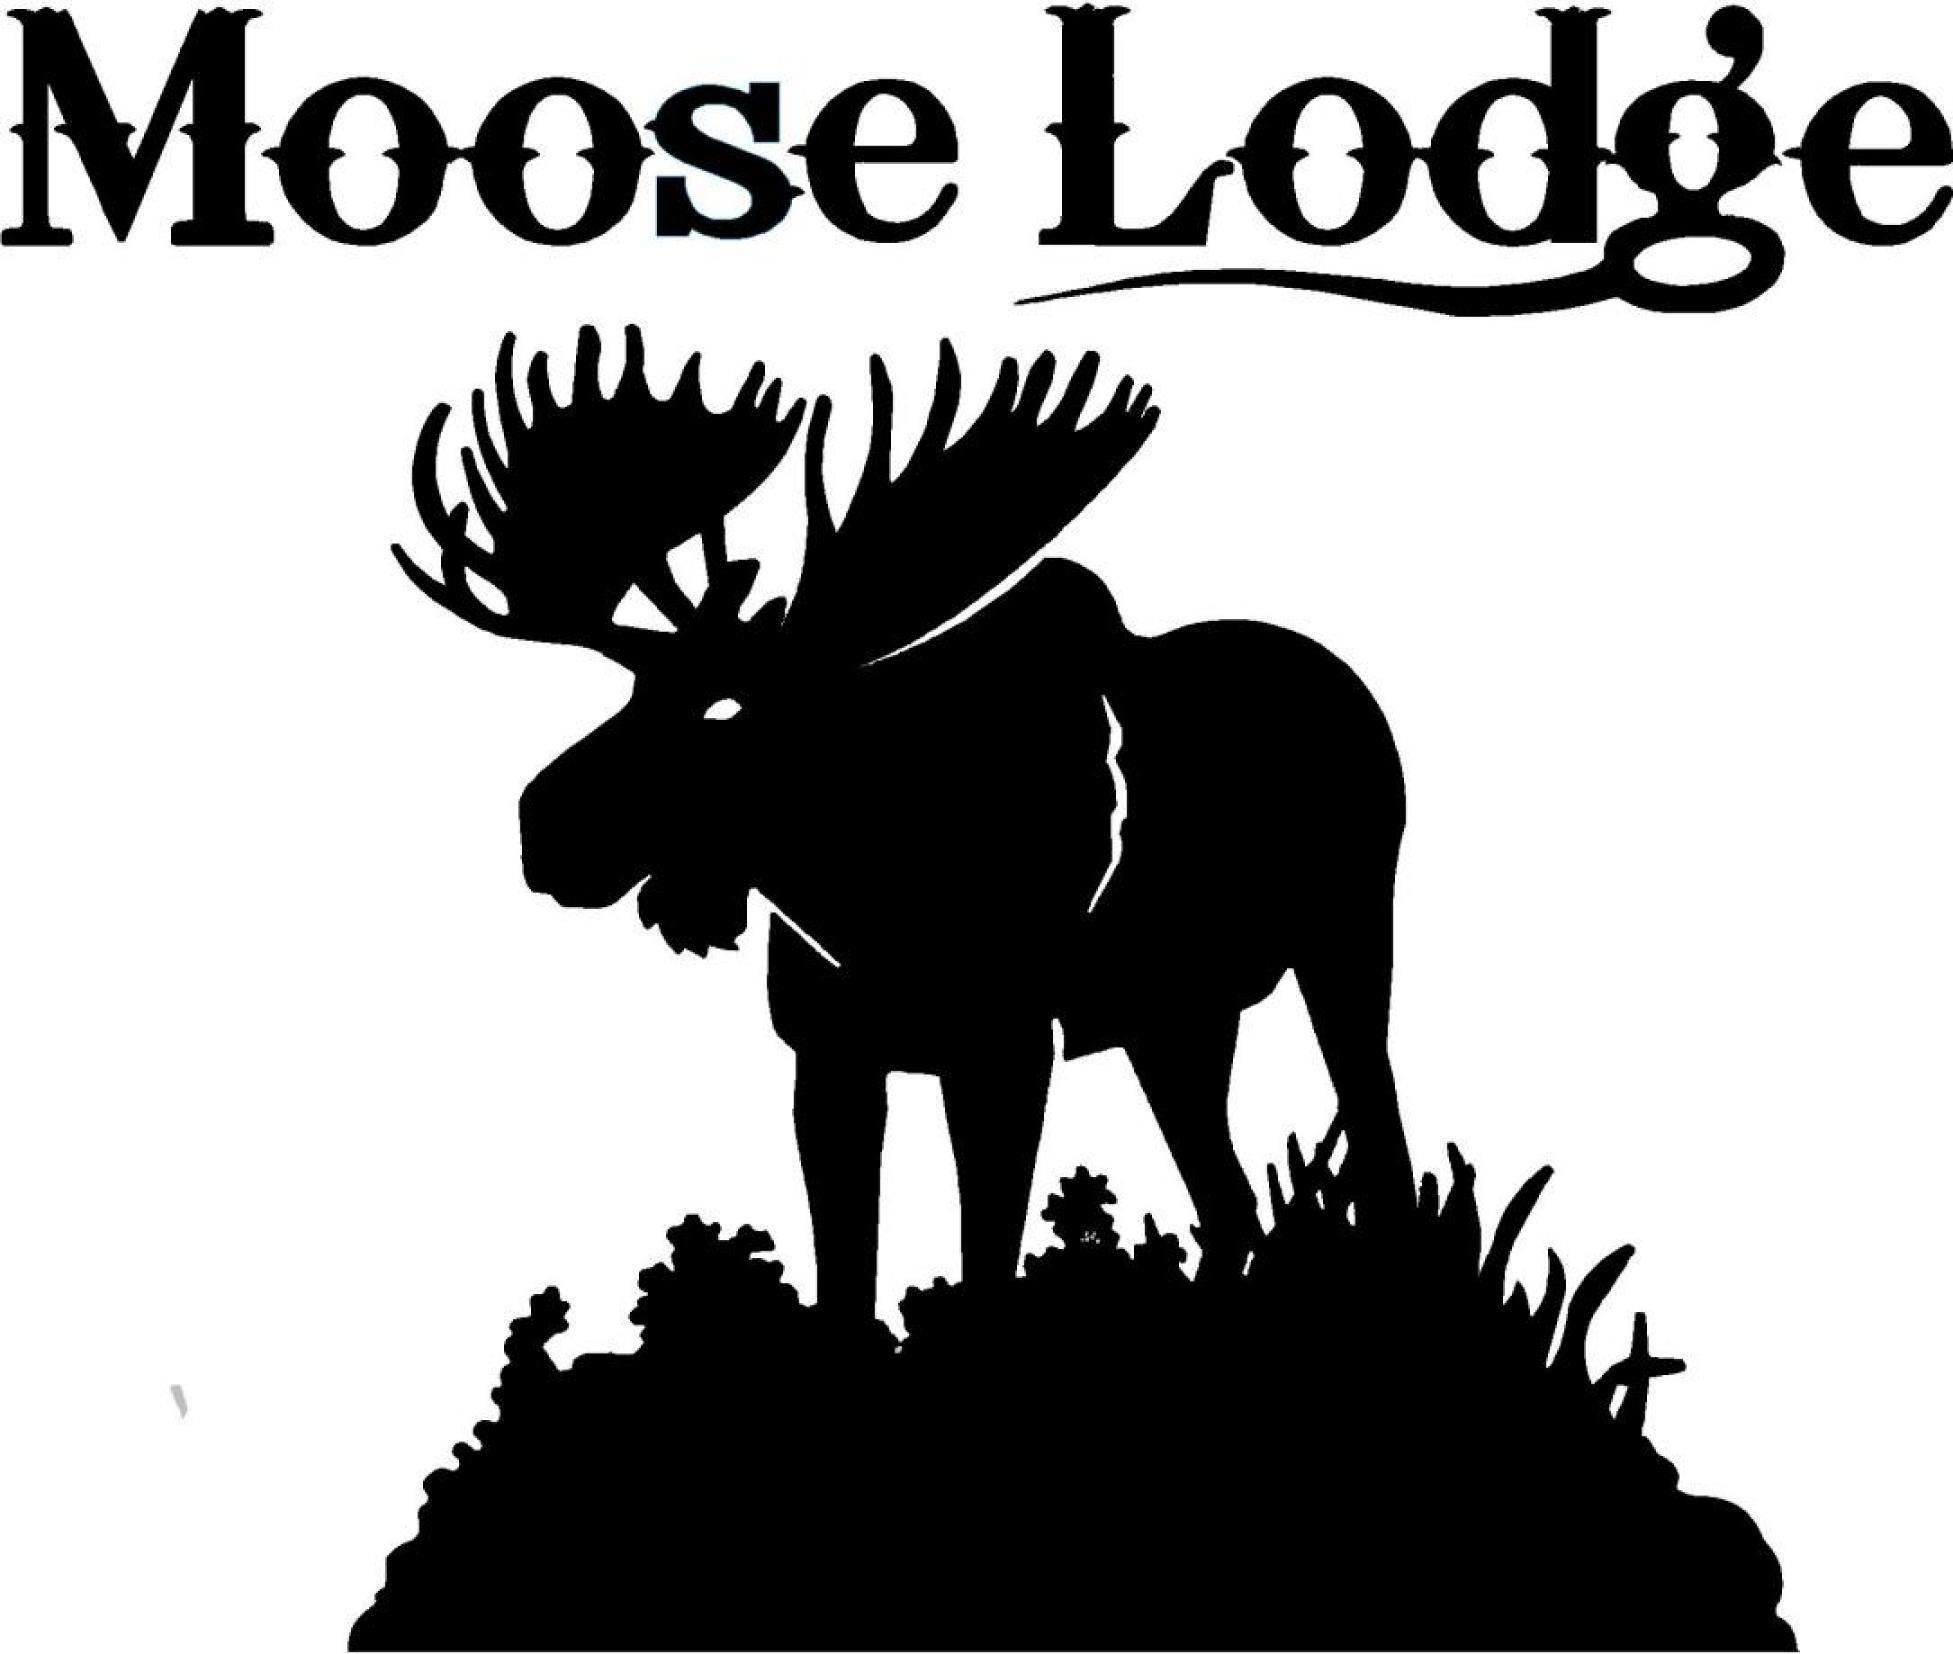 Who Has a Moose Logo - moose lodge logo | skilledthis has been a barbecue grill that was a ...